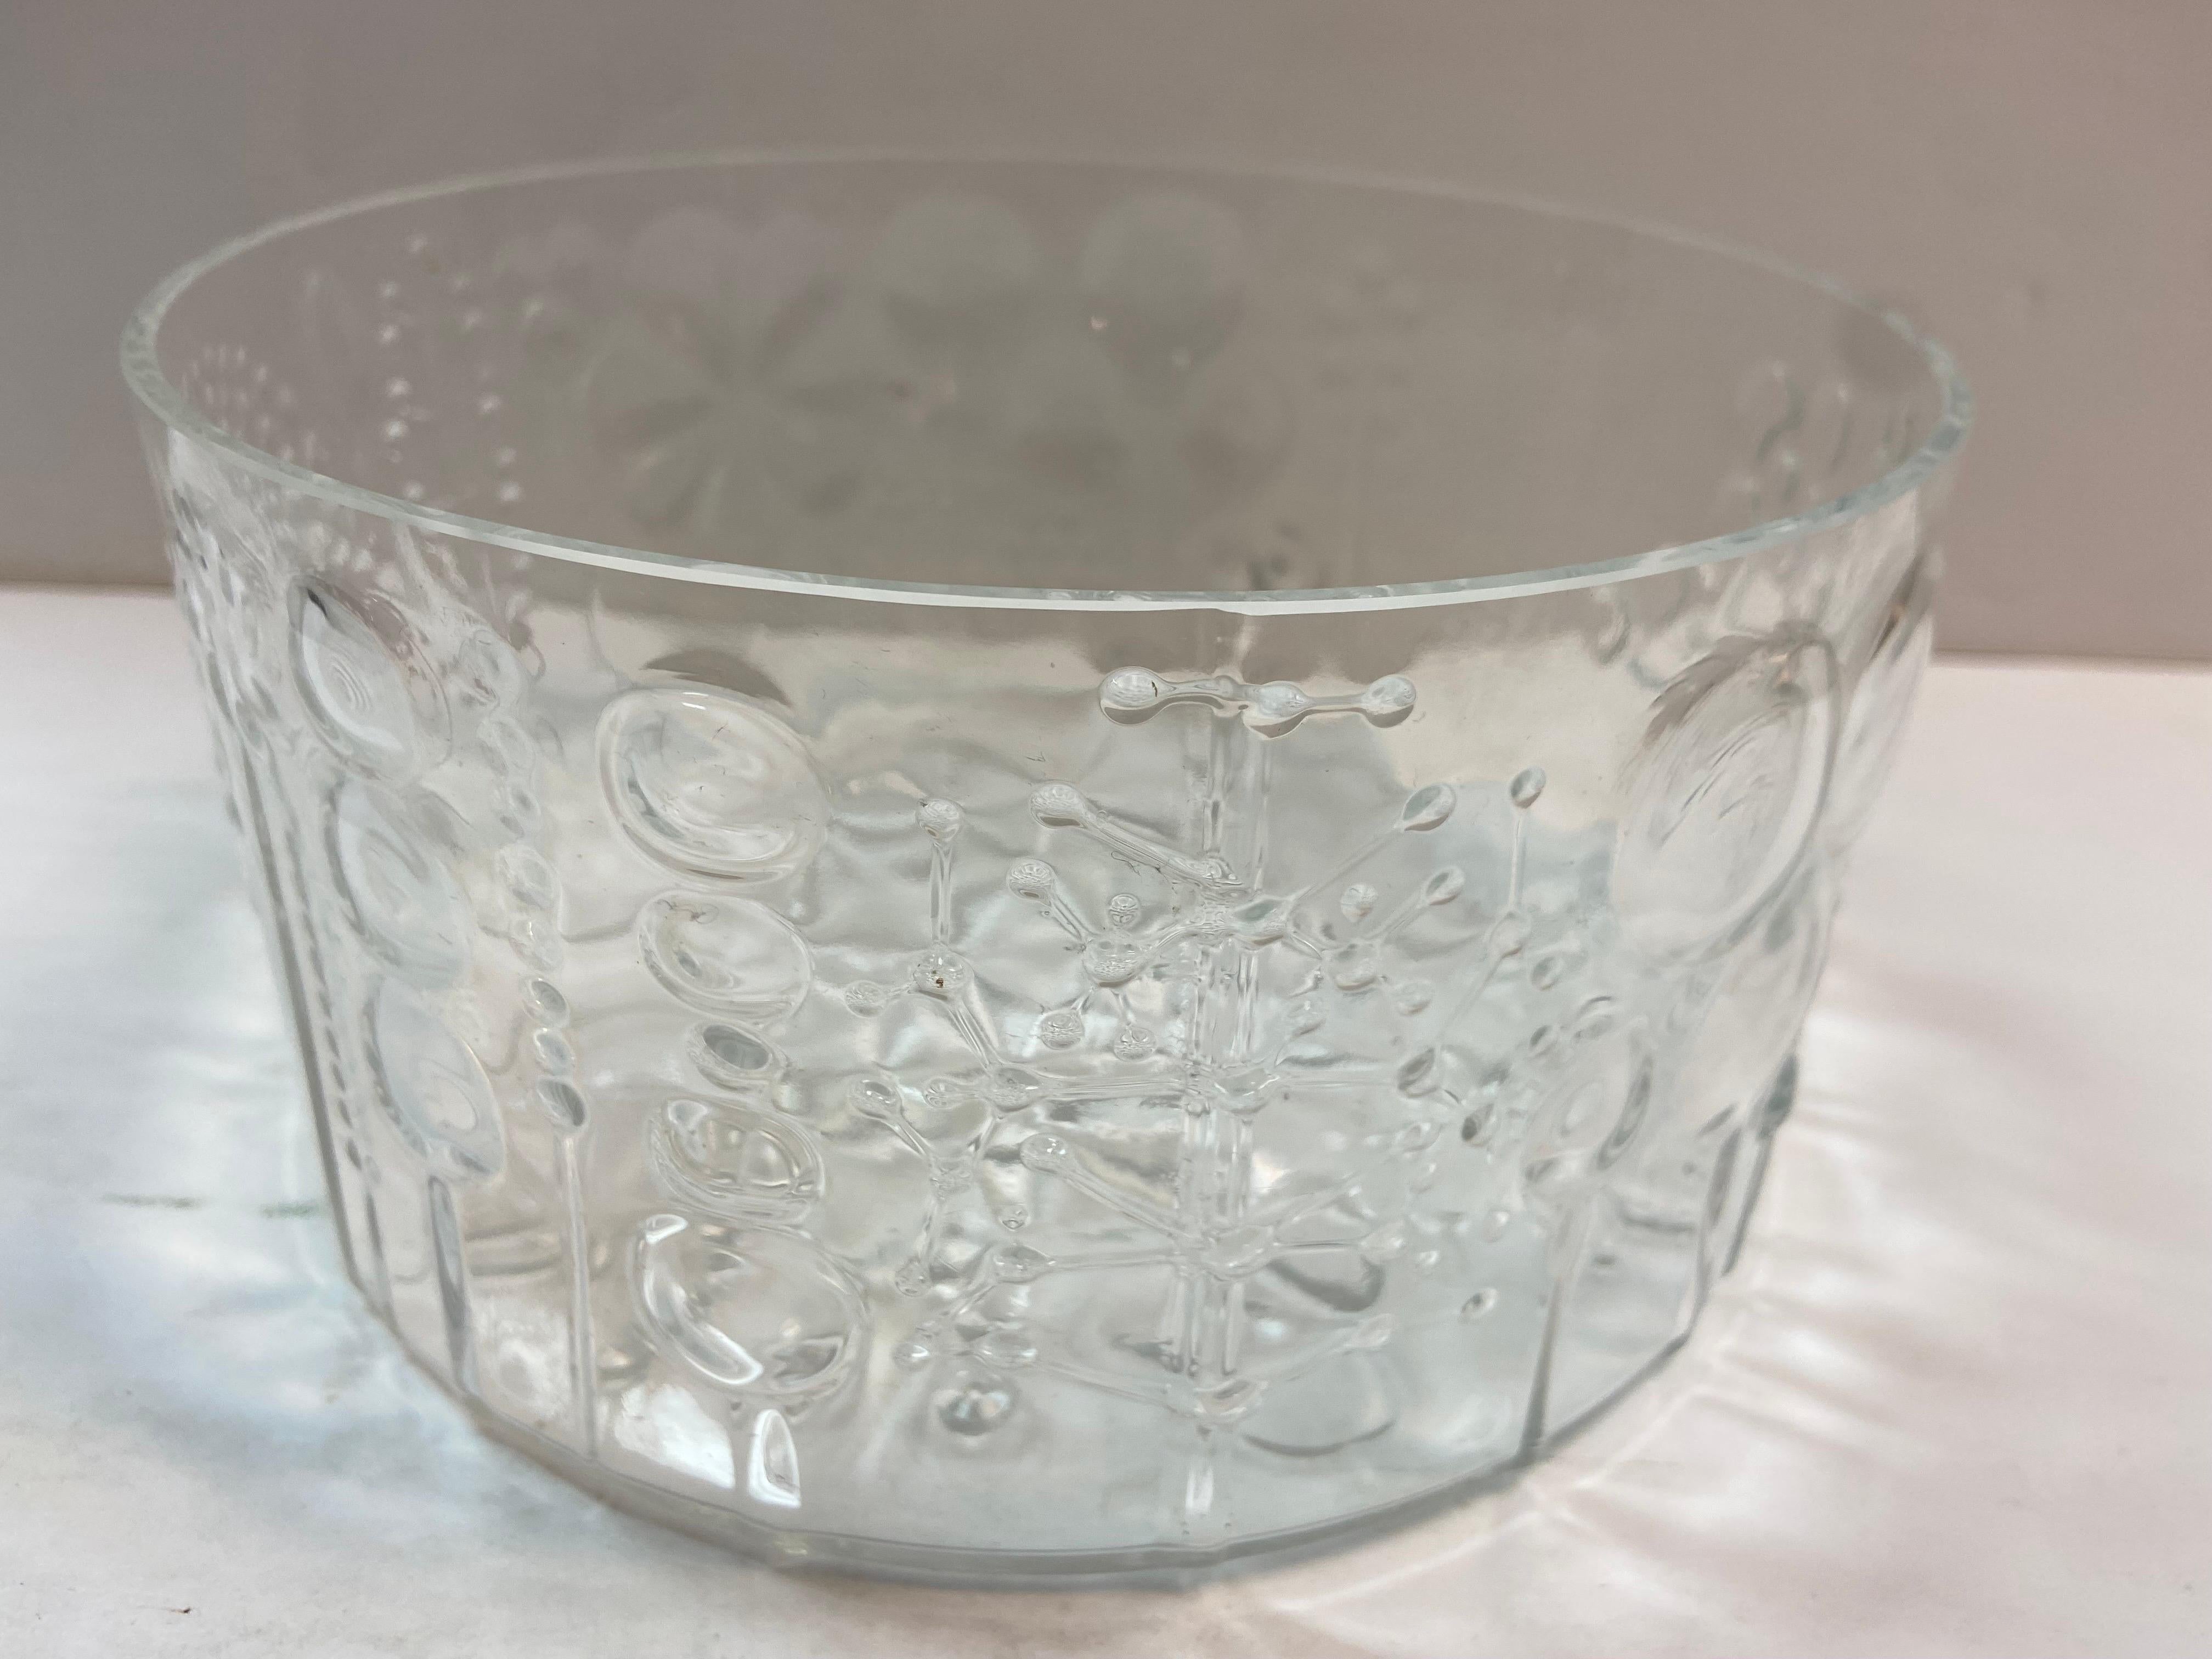 A vintage clear glass salad bowl by Oiva Toikka for Nuutajarvi Notsjo which later became Iittala. This design is called Flora and was done in 1966. This large glass serving bowl has a beautiful pattern of abstracted flowers. This design can be found